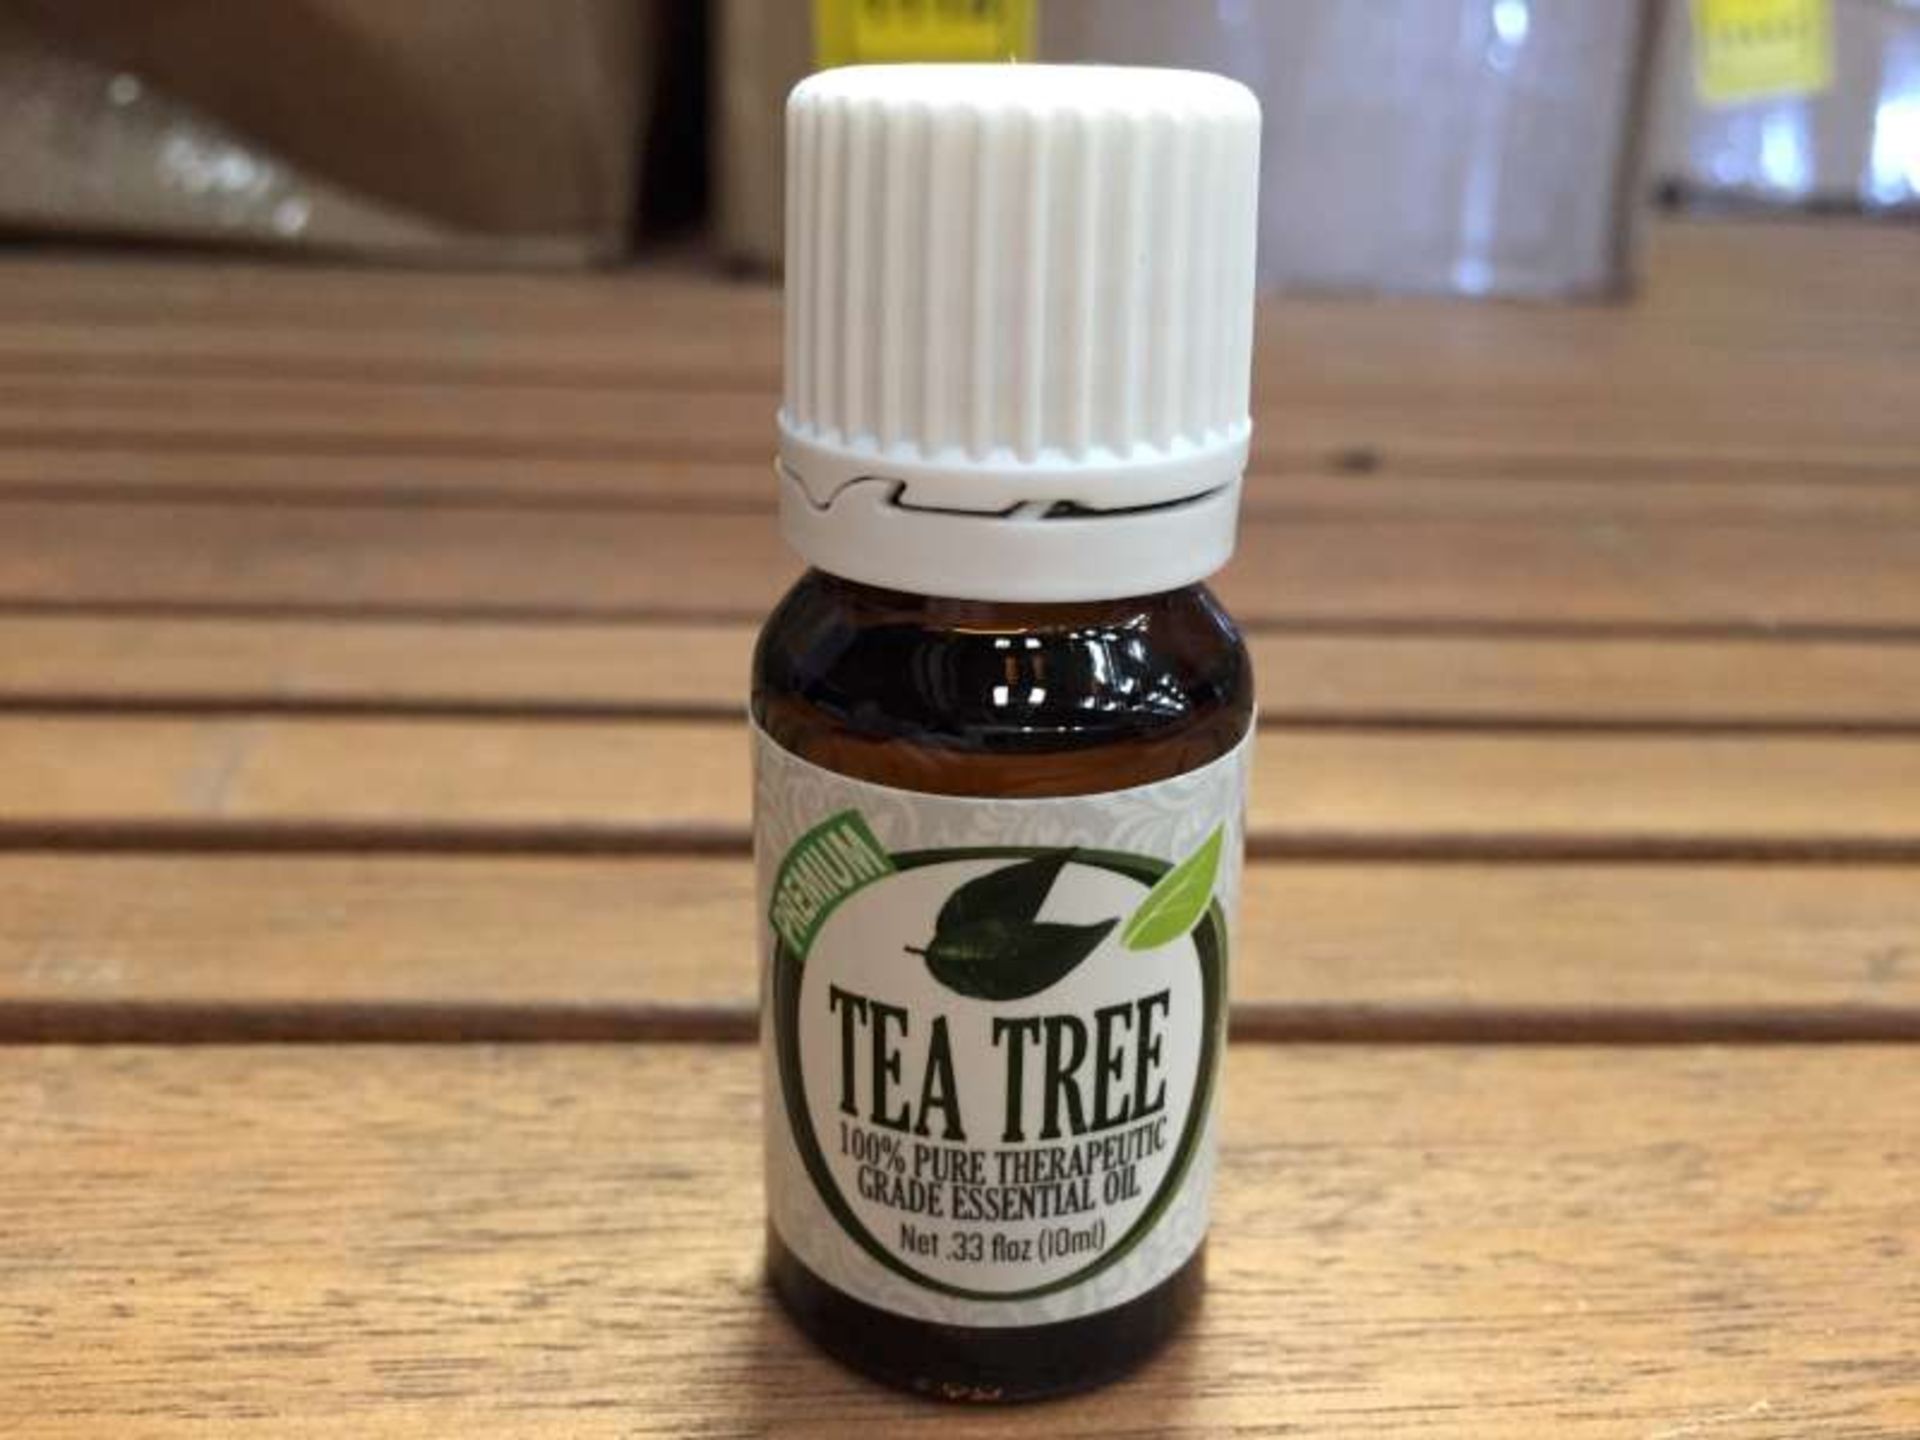 100 X 10 ML BOTTLES OF HEALING SOLUTIONS TEA TREE 100% PURE THERAPEUTIC GRADE ESSENTIAL OIL IN 1